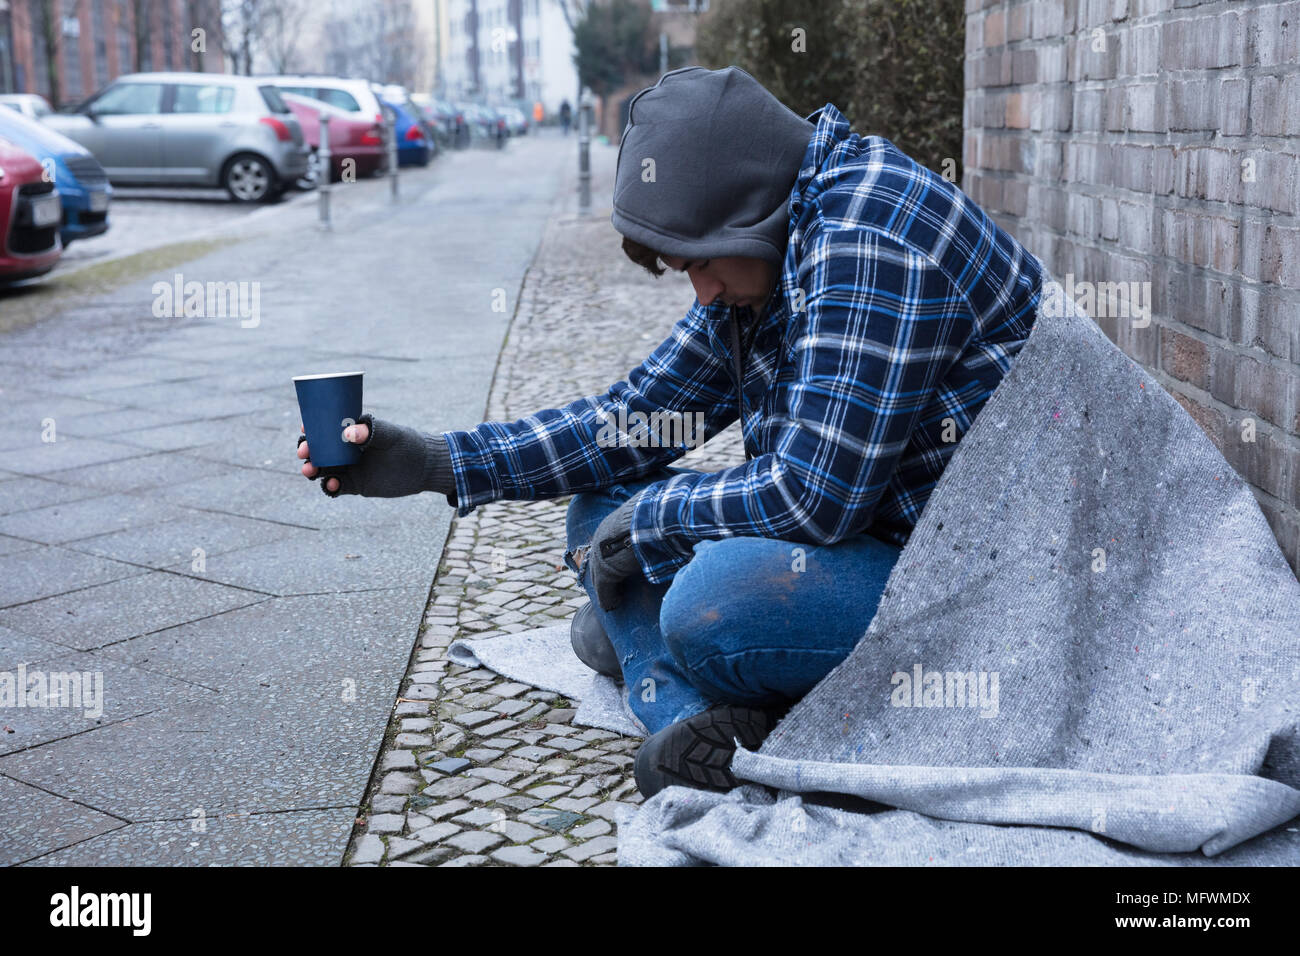 Beggar's Hand Wearing Gloves Holding Disposable Cup Stock Photo